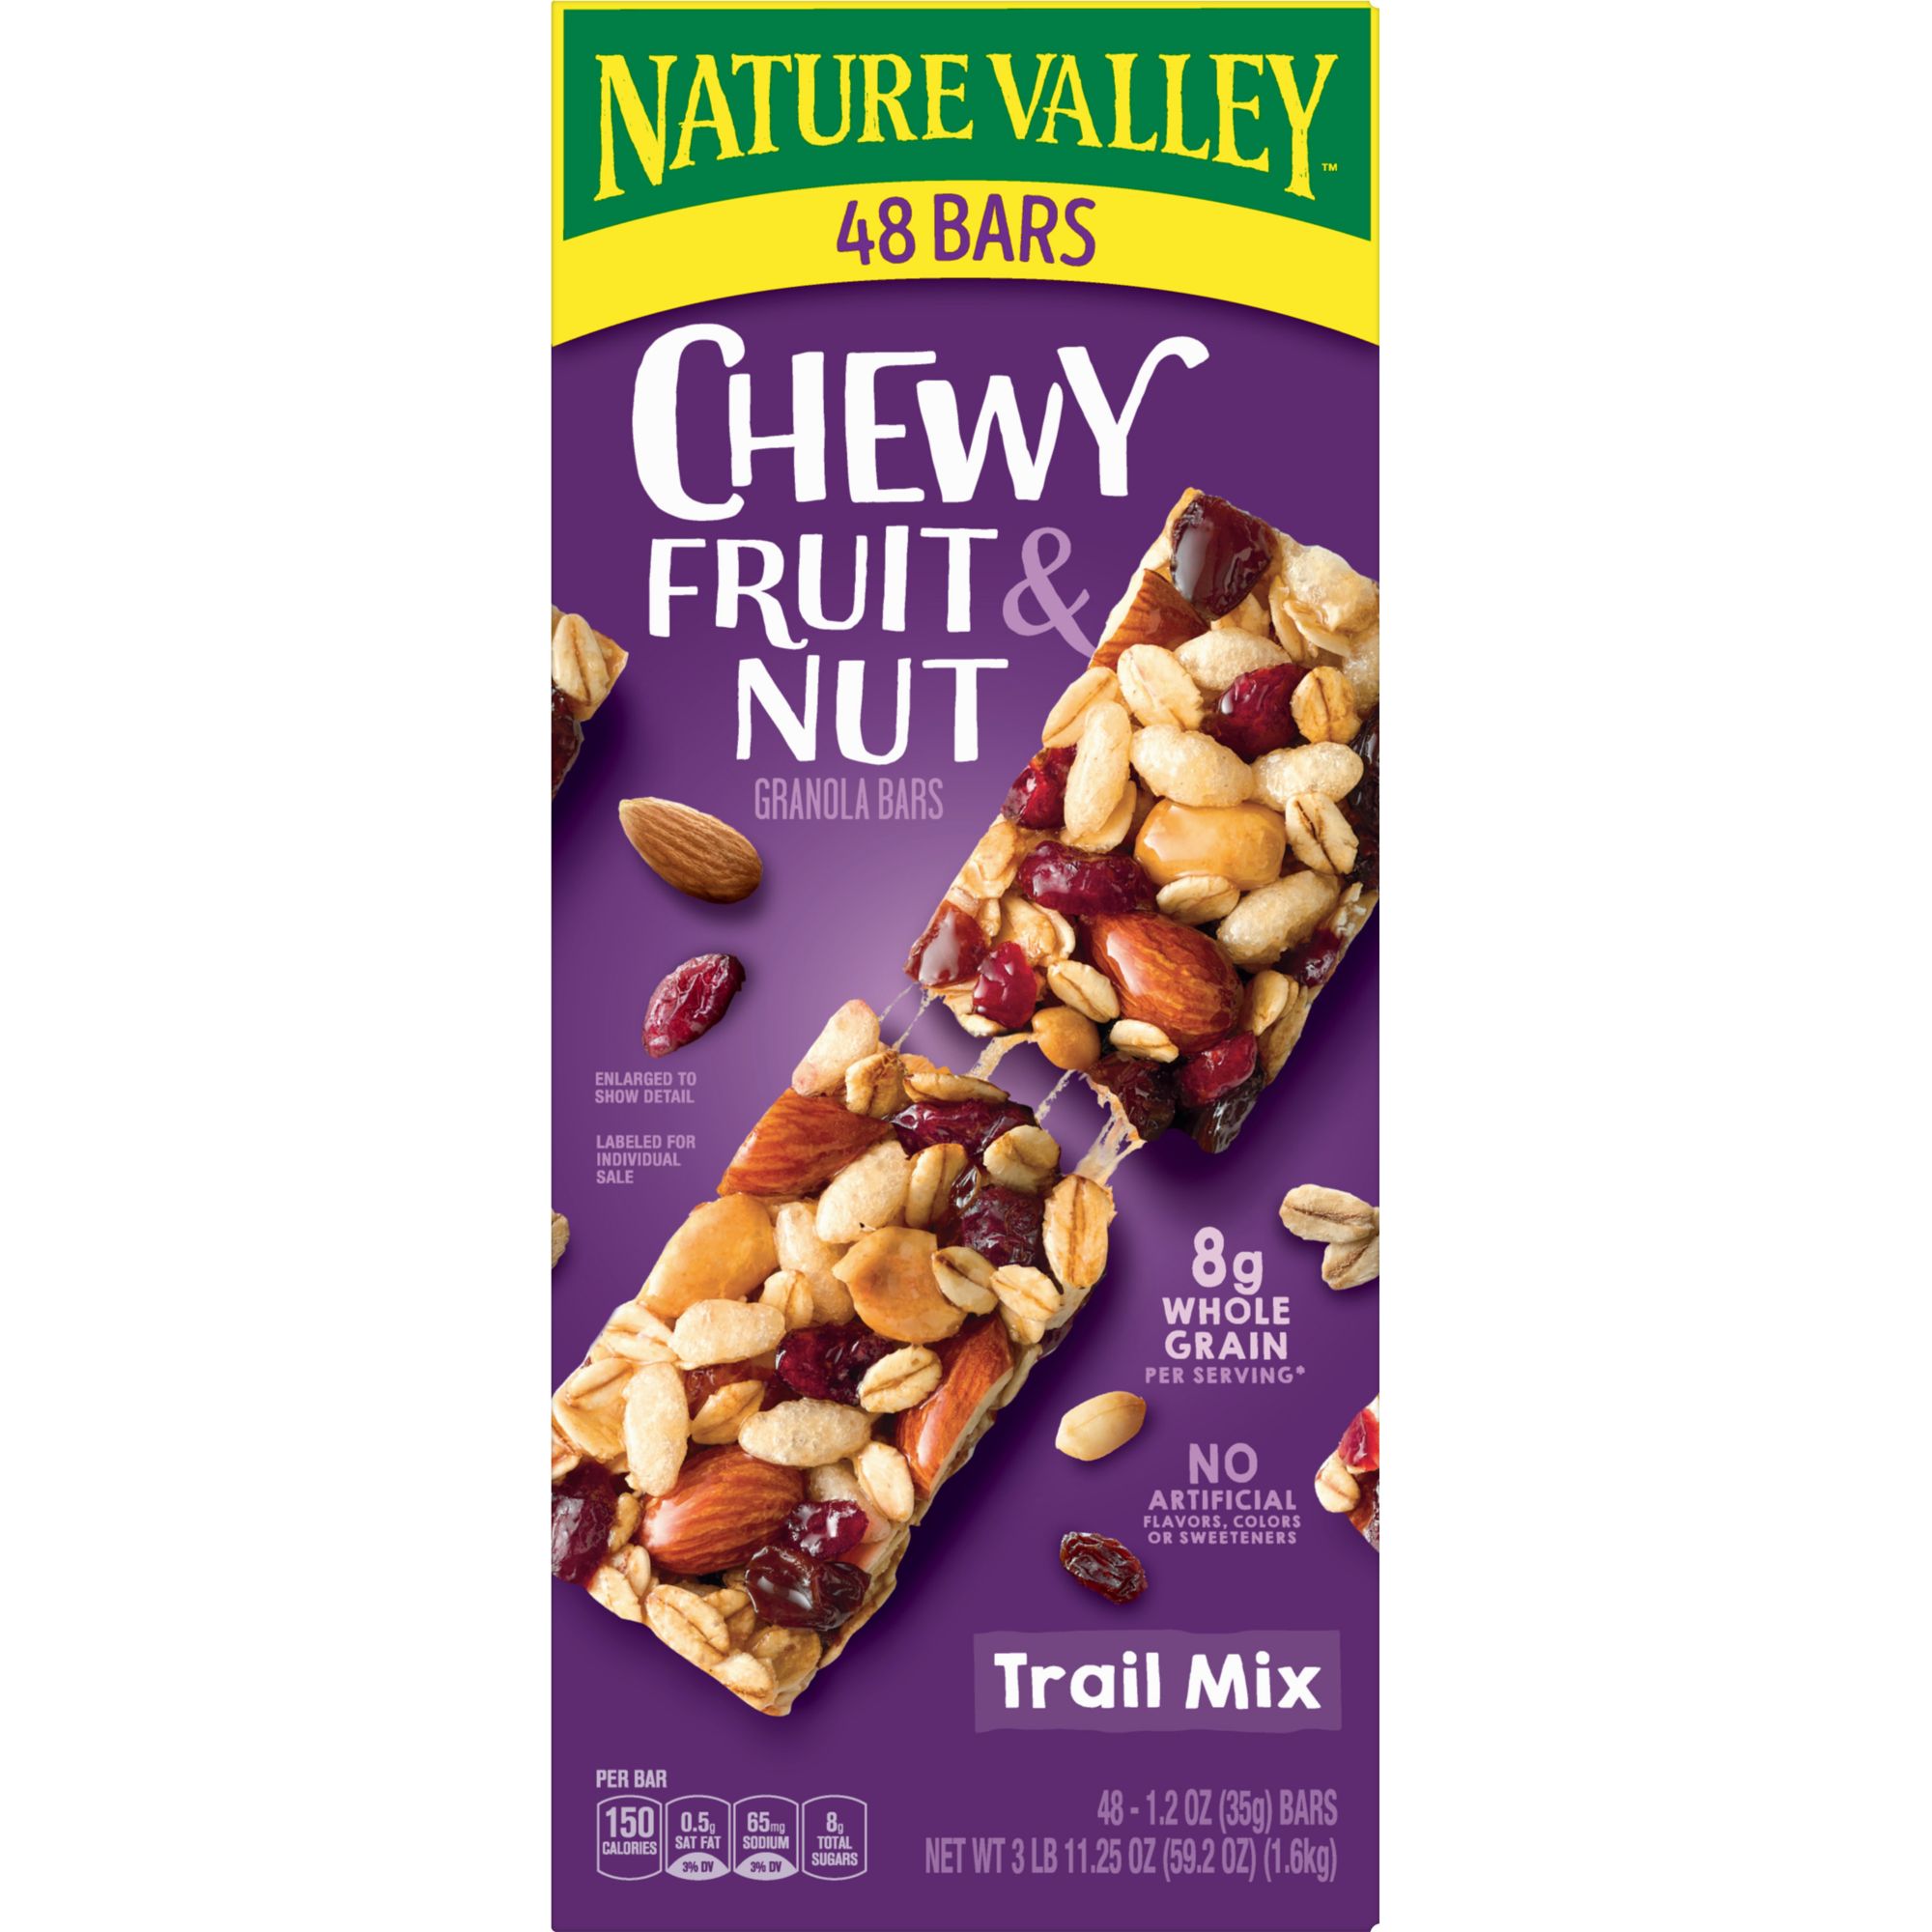 Nature Valley Sweet and Salty Peanut Granola Bars, 12 ct / 1.2 oz